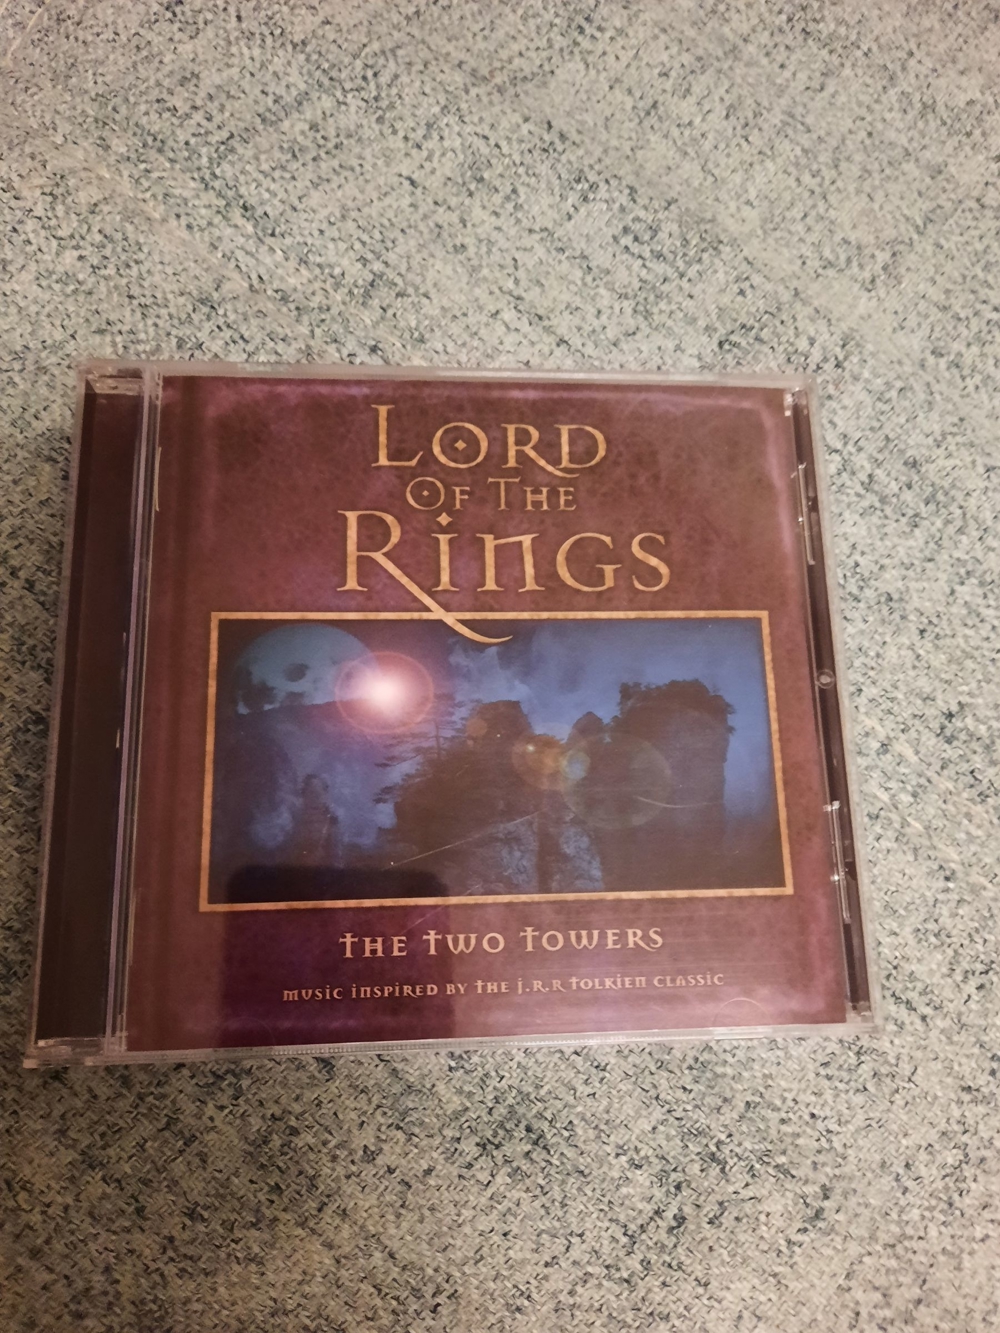 Musik CD "Mickey Simmonds - Lord Of The Rings (The Two Towers)"